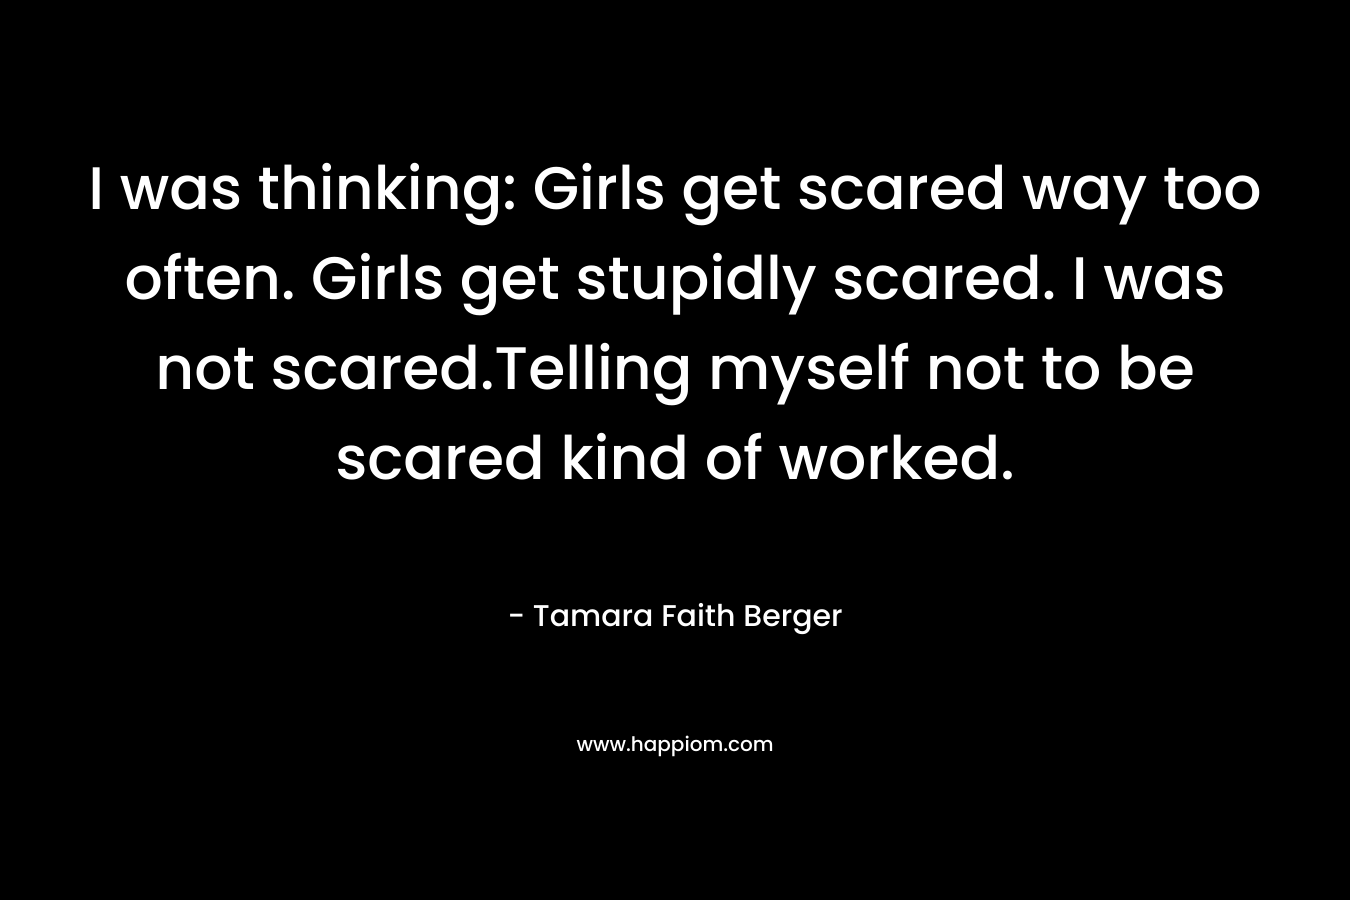 I was thinking: Girls get scared way too often. Girls get stupidly scared. I was not scared.Telling myself not to be scared kind of worked.